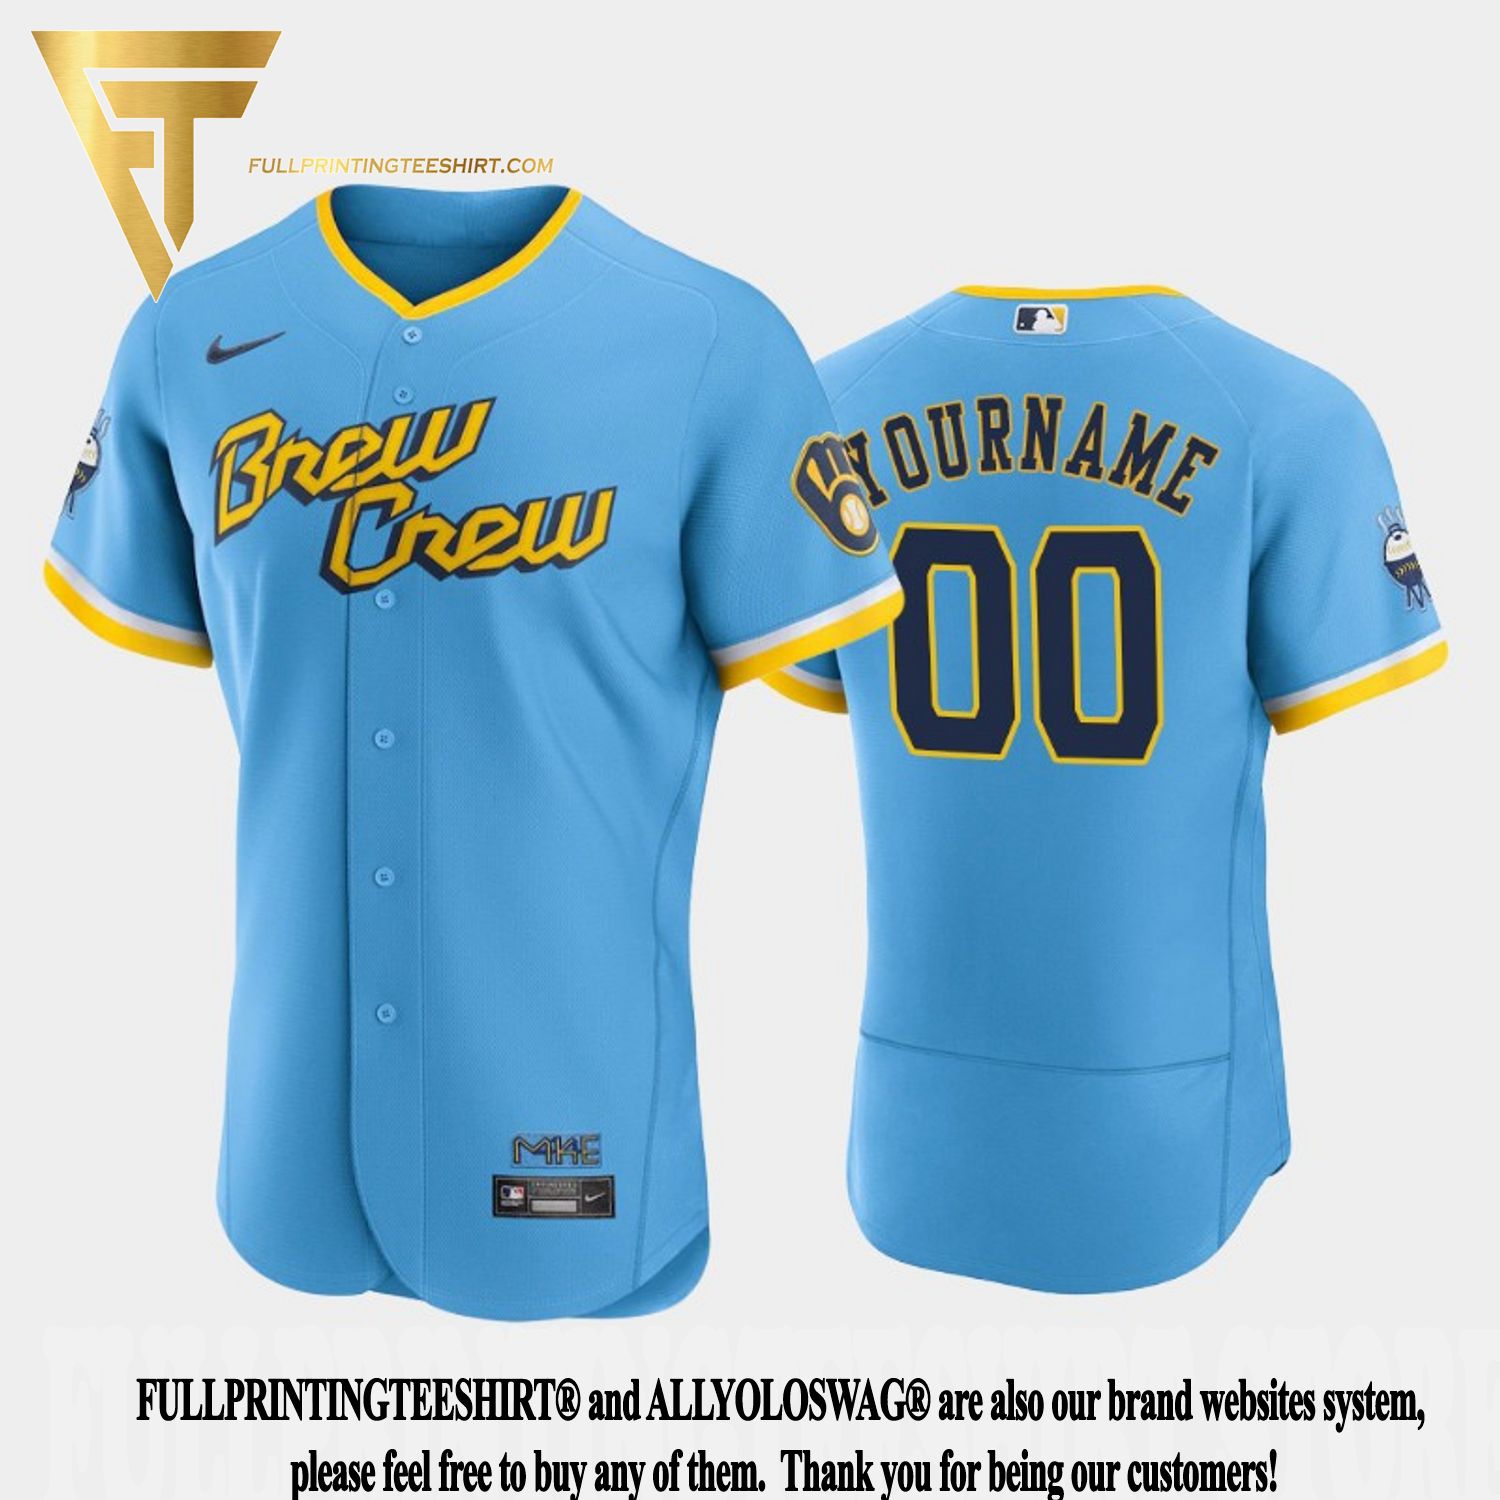 gold brewers jersey